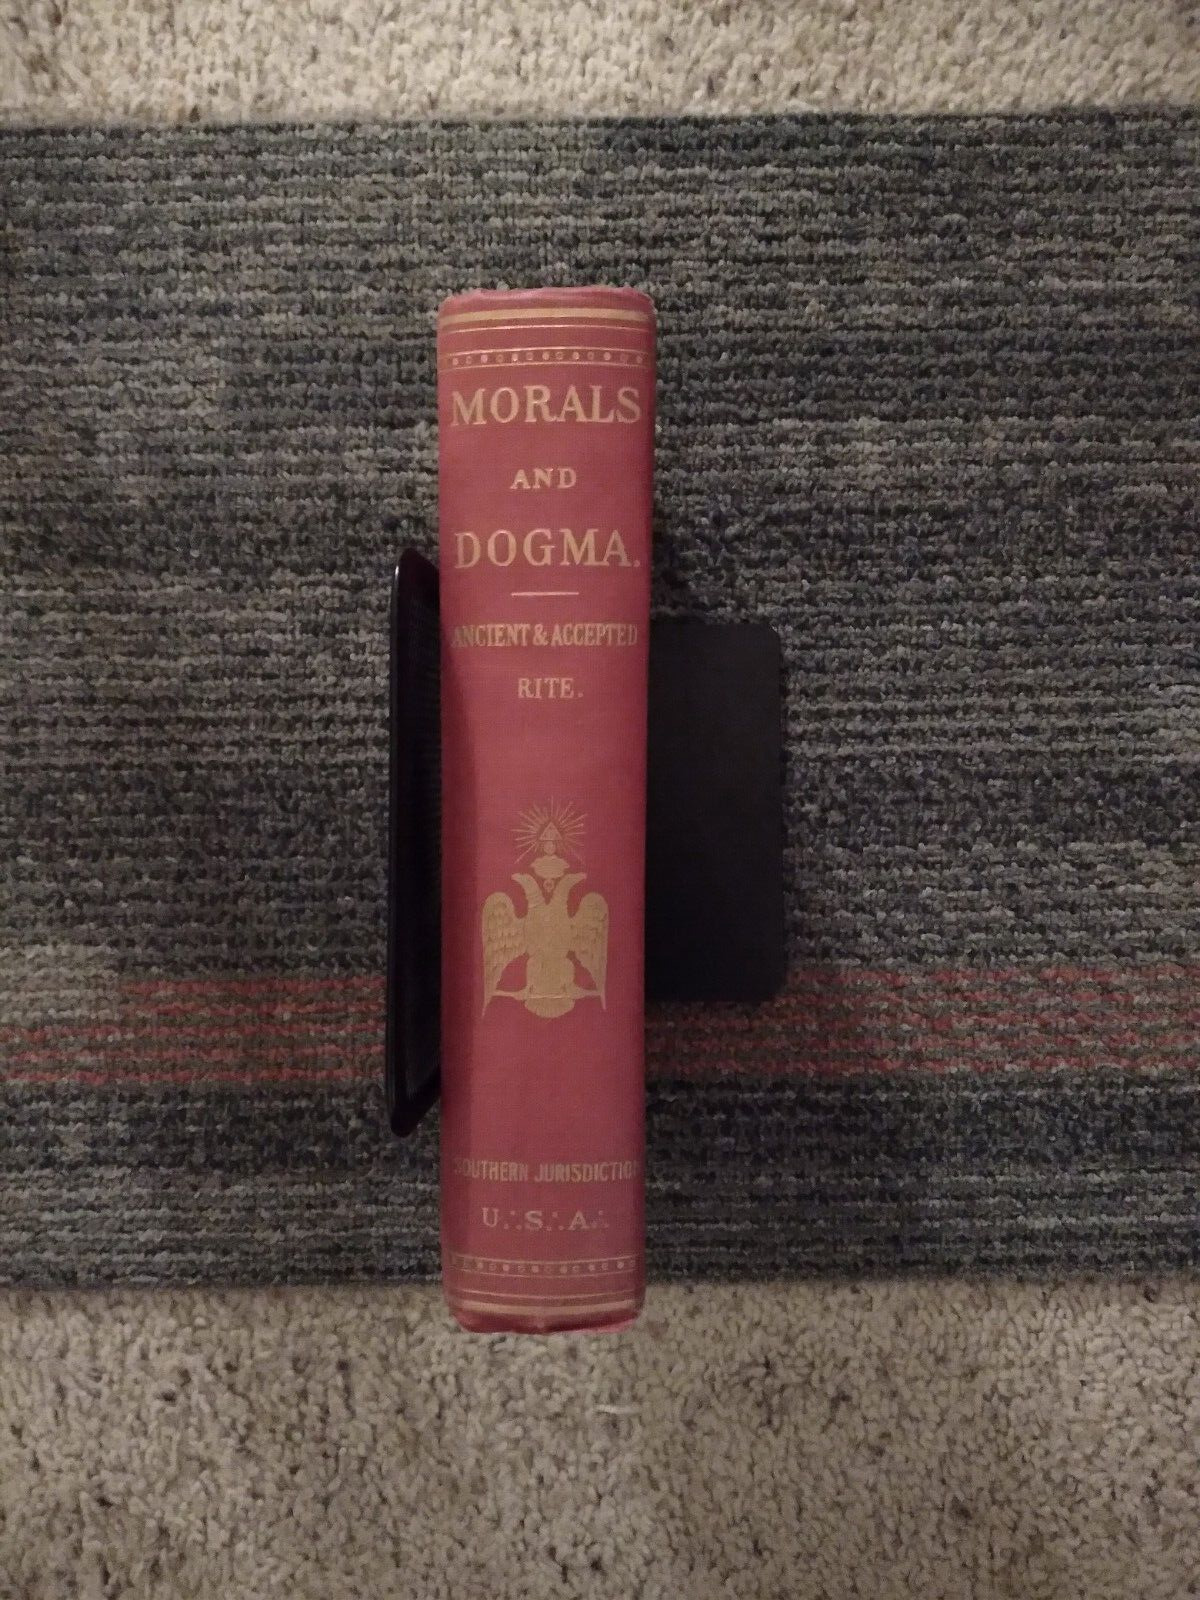 Morals and Dogma Ancient and Accepted Rite Freemasonry October 1949 Albert Pike